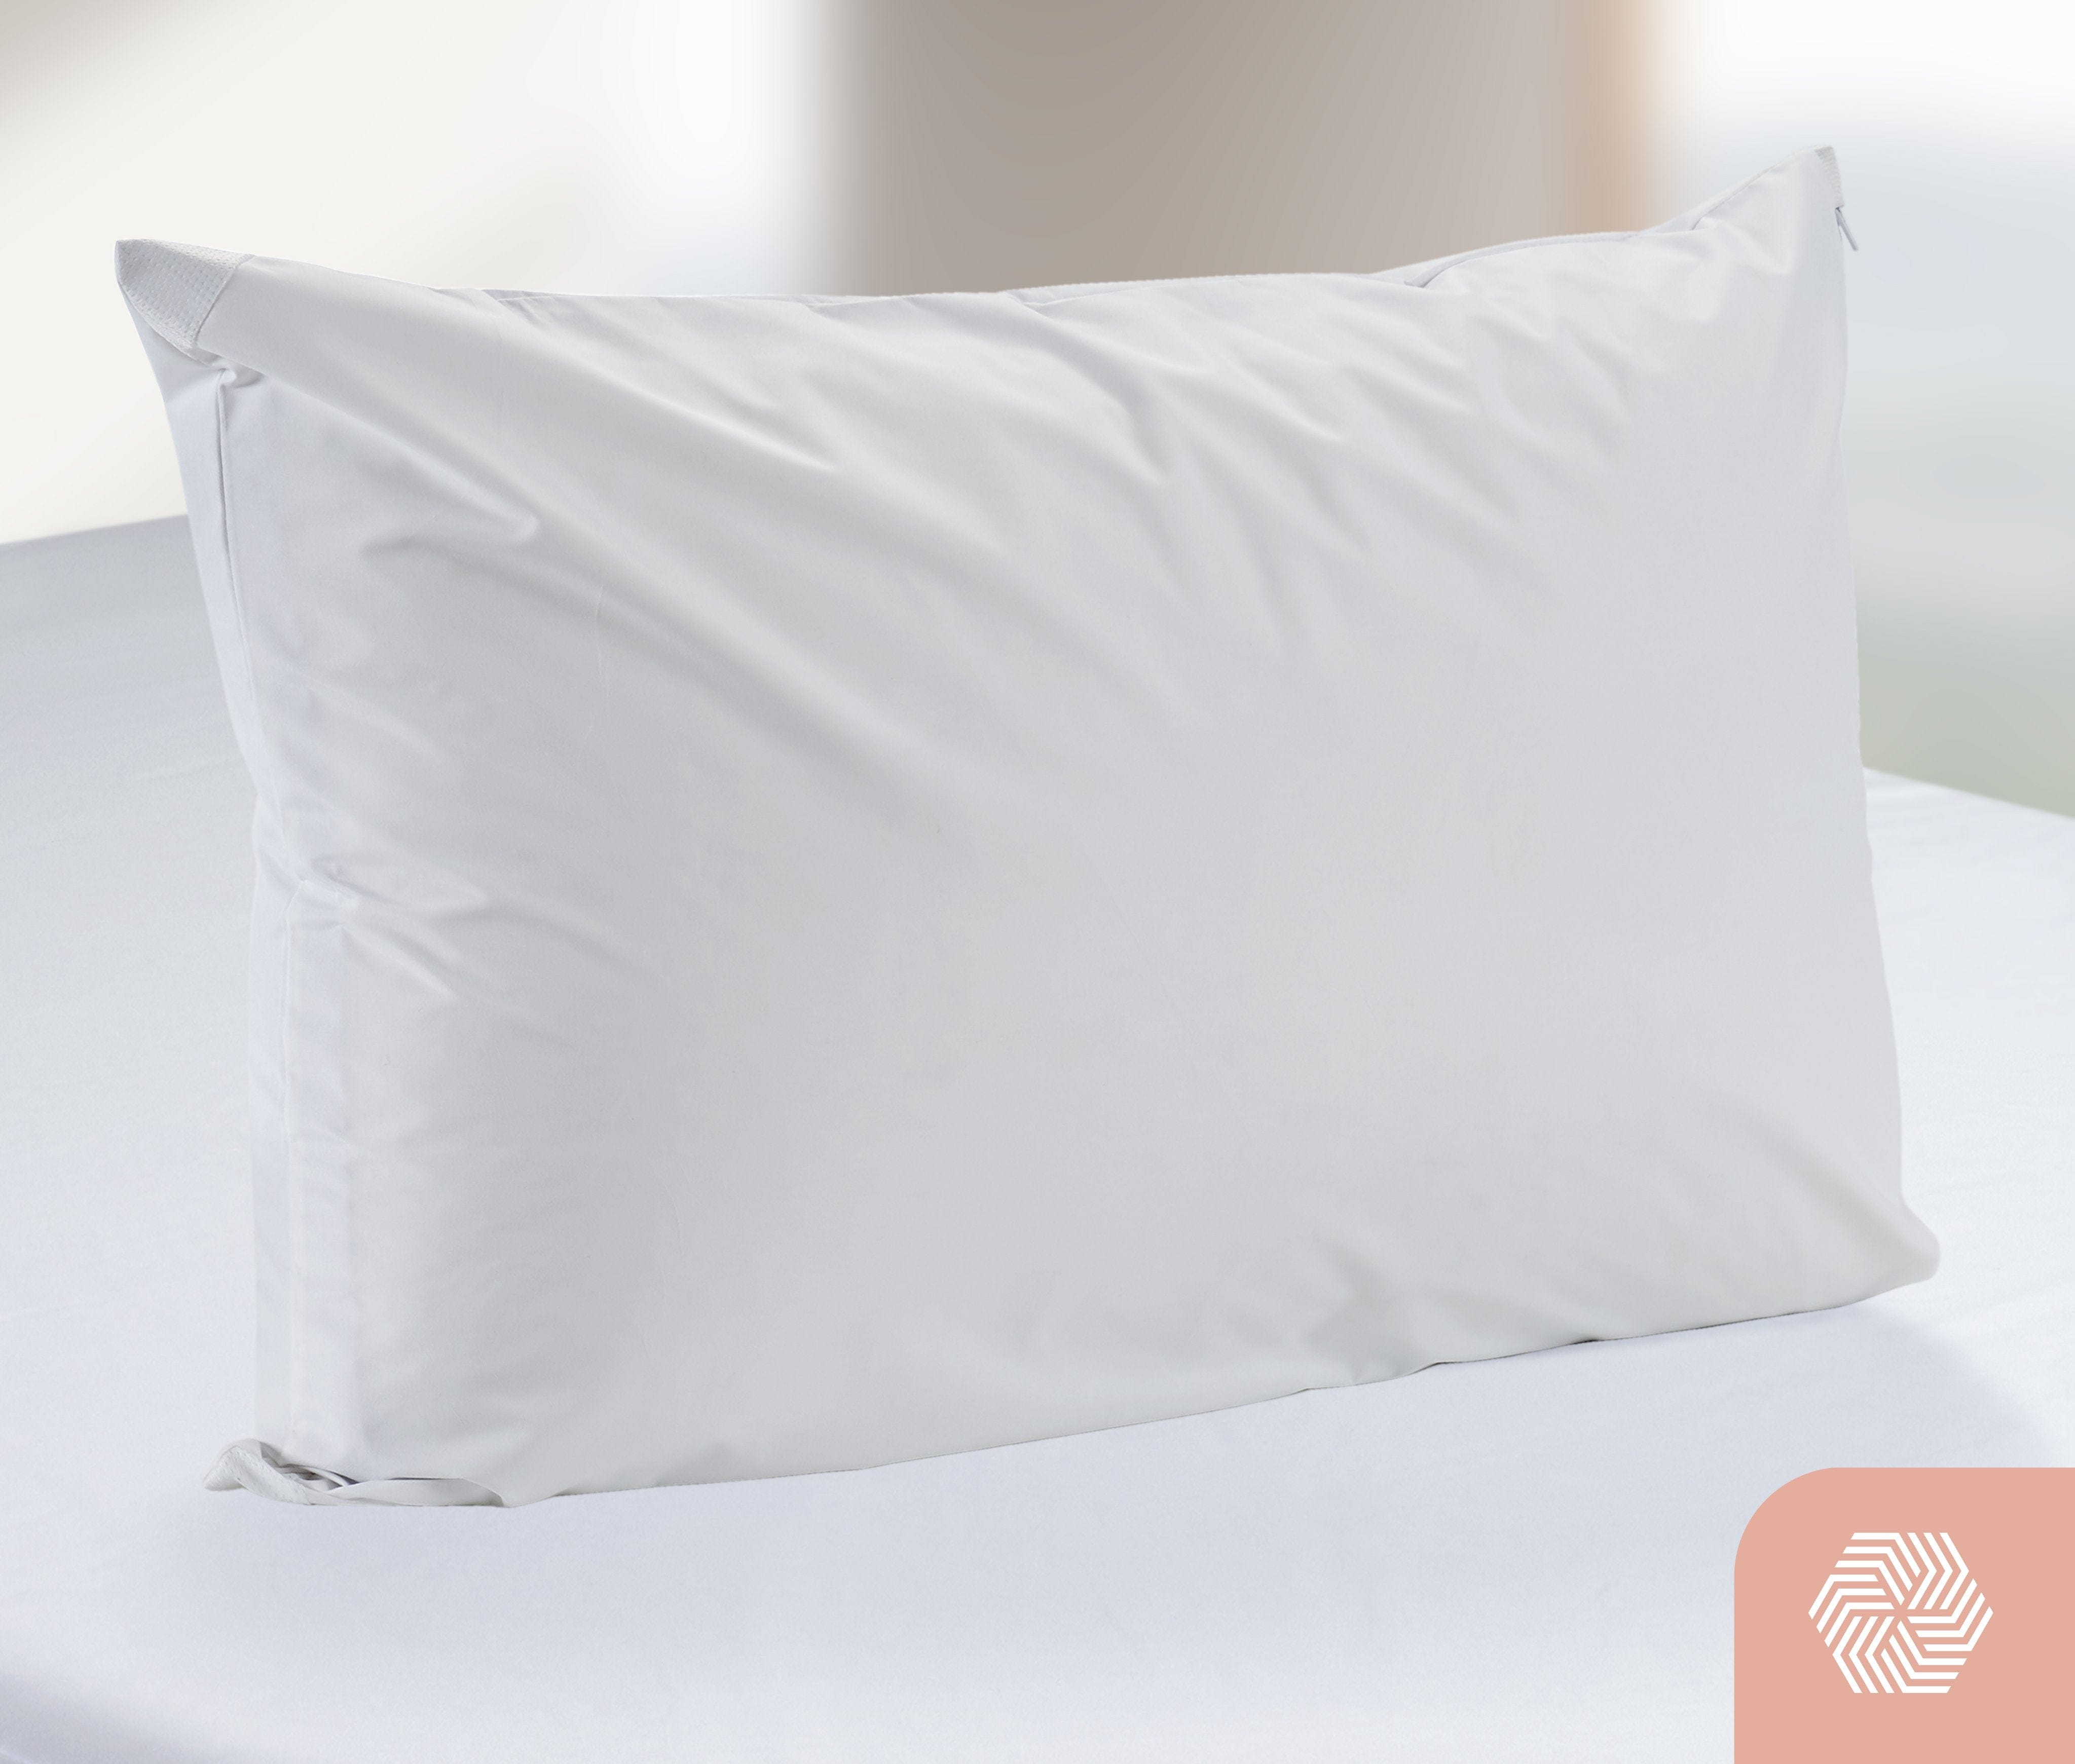 https://cdn.shopify.com/s/files/1/2554/4674/products/Comfort_Pillow_Protector.jpg?v=1665497947&width=4094